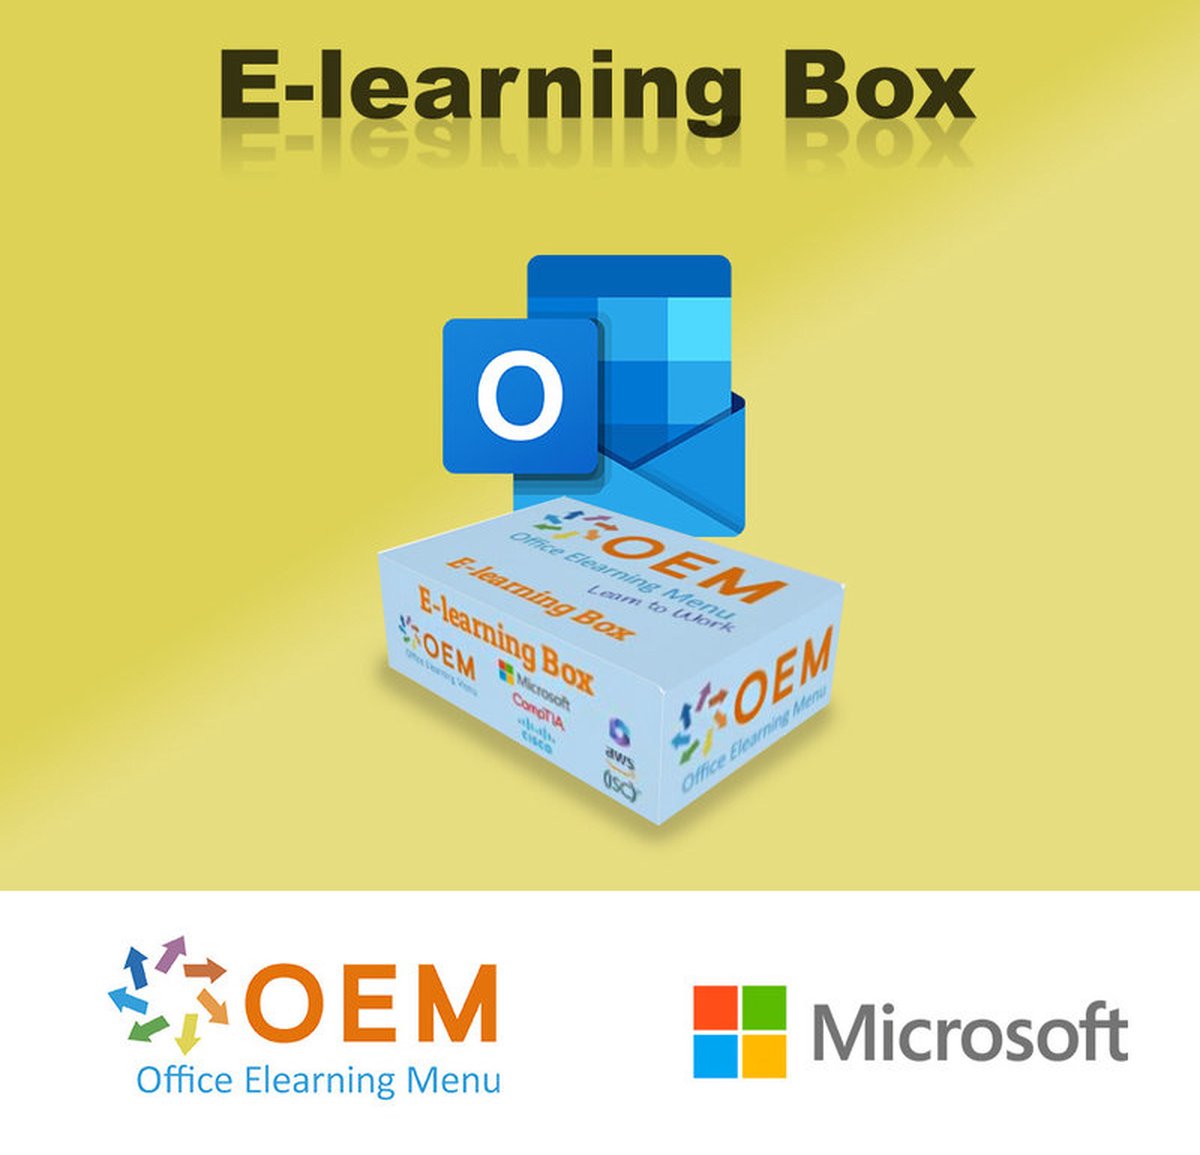 Outlook 365 E-Learning Training Cursus Box - OEM Office ELearning Menu